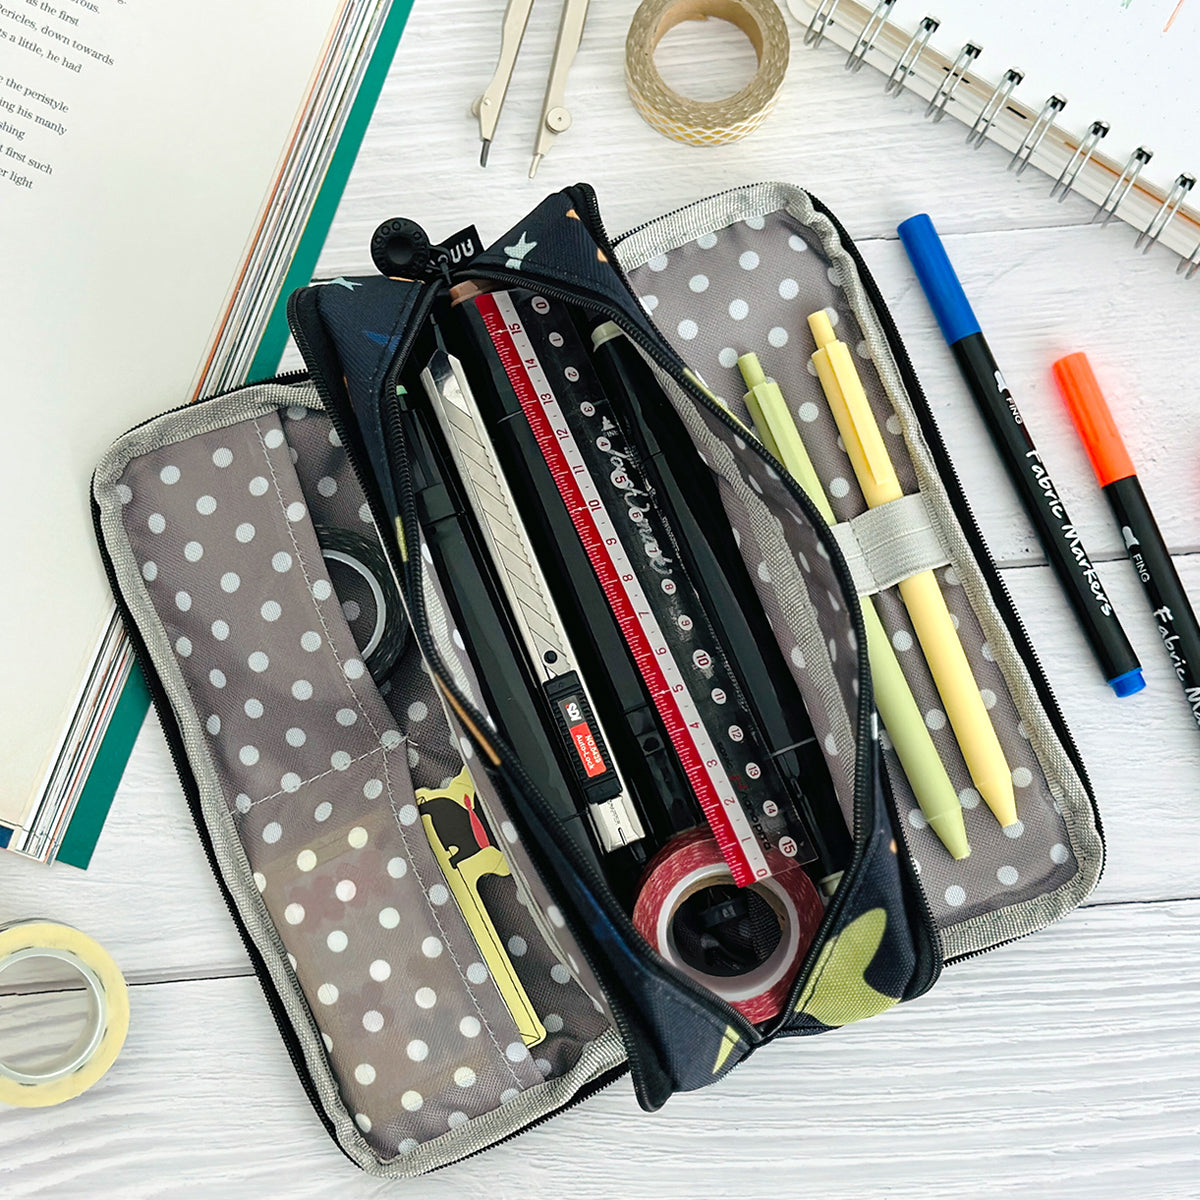 Wholesale private label pencil case For Storing Stationery Easily 